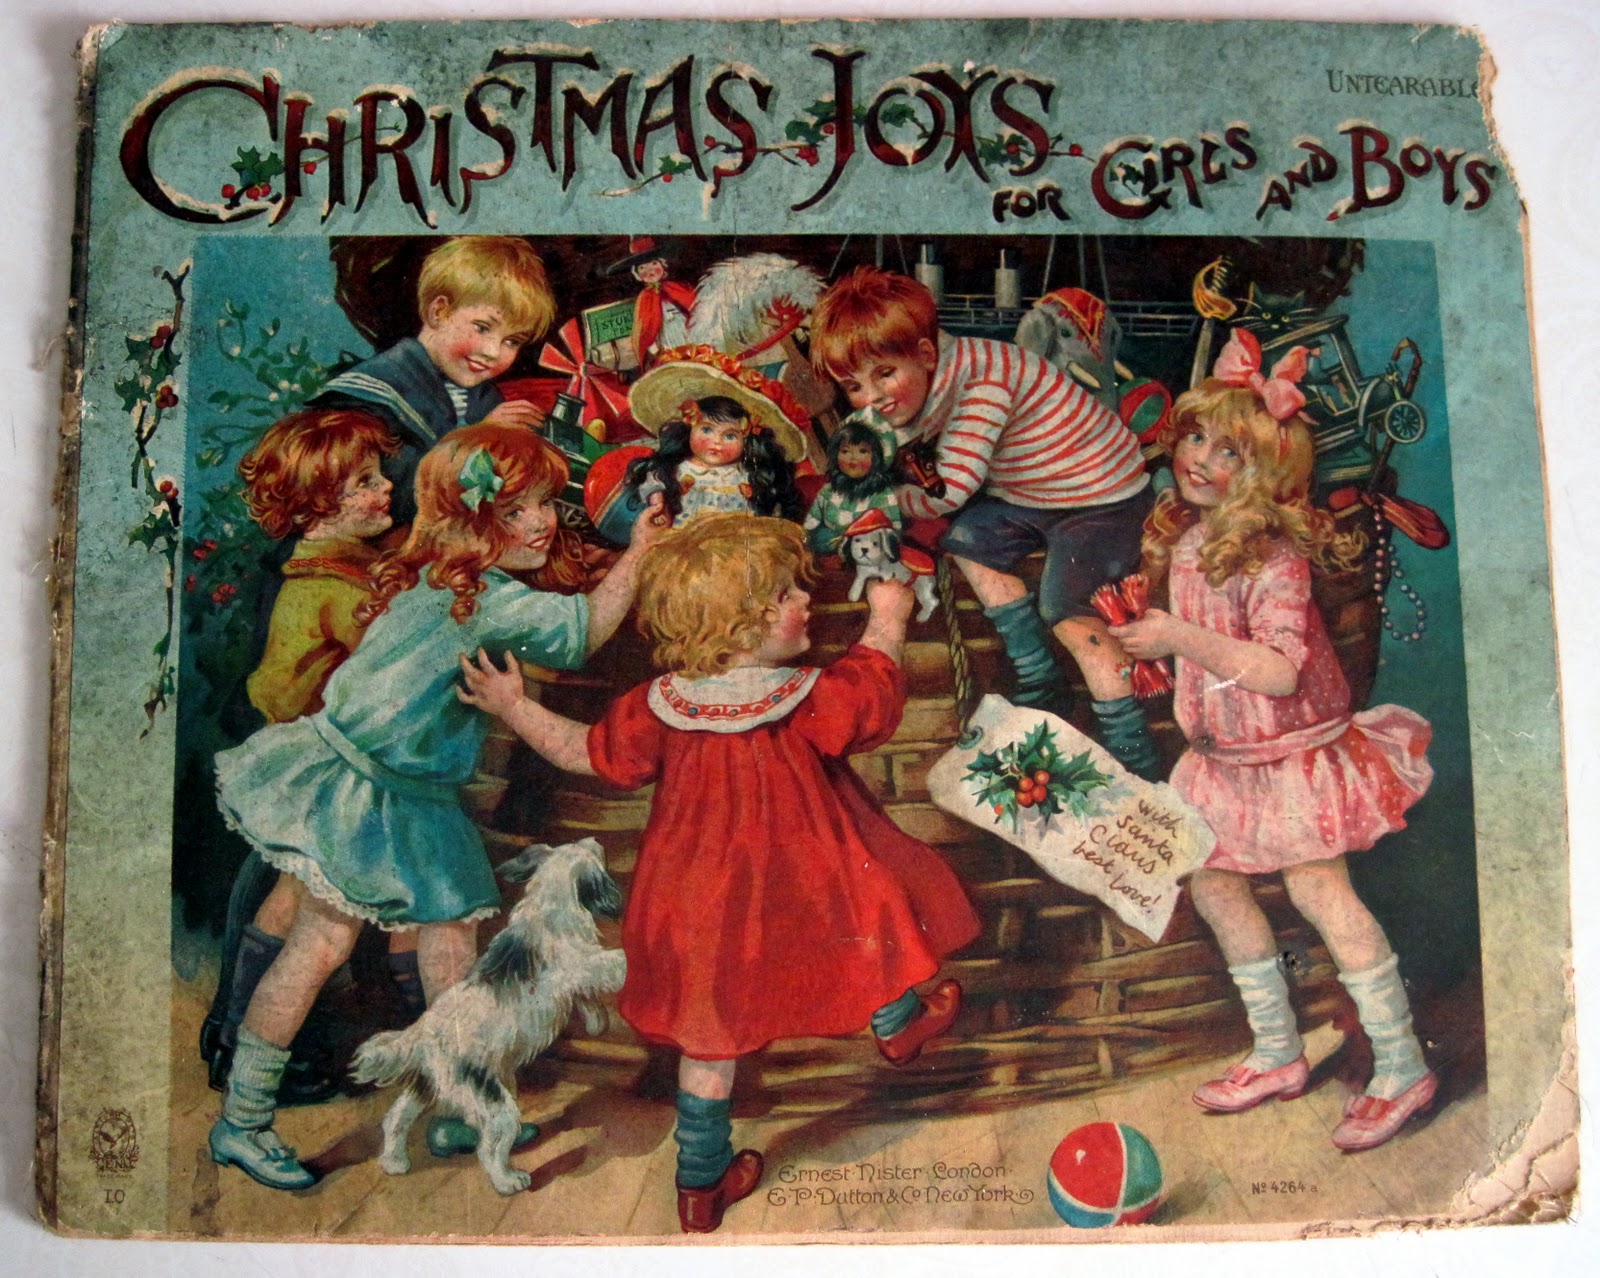 Tracy's Toys (and Some Other Stuff) Antique Children's Christmas Book